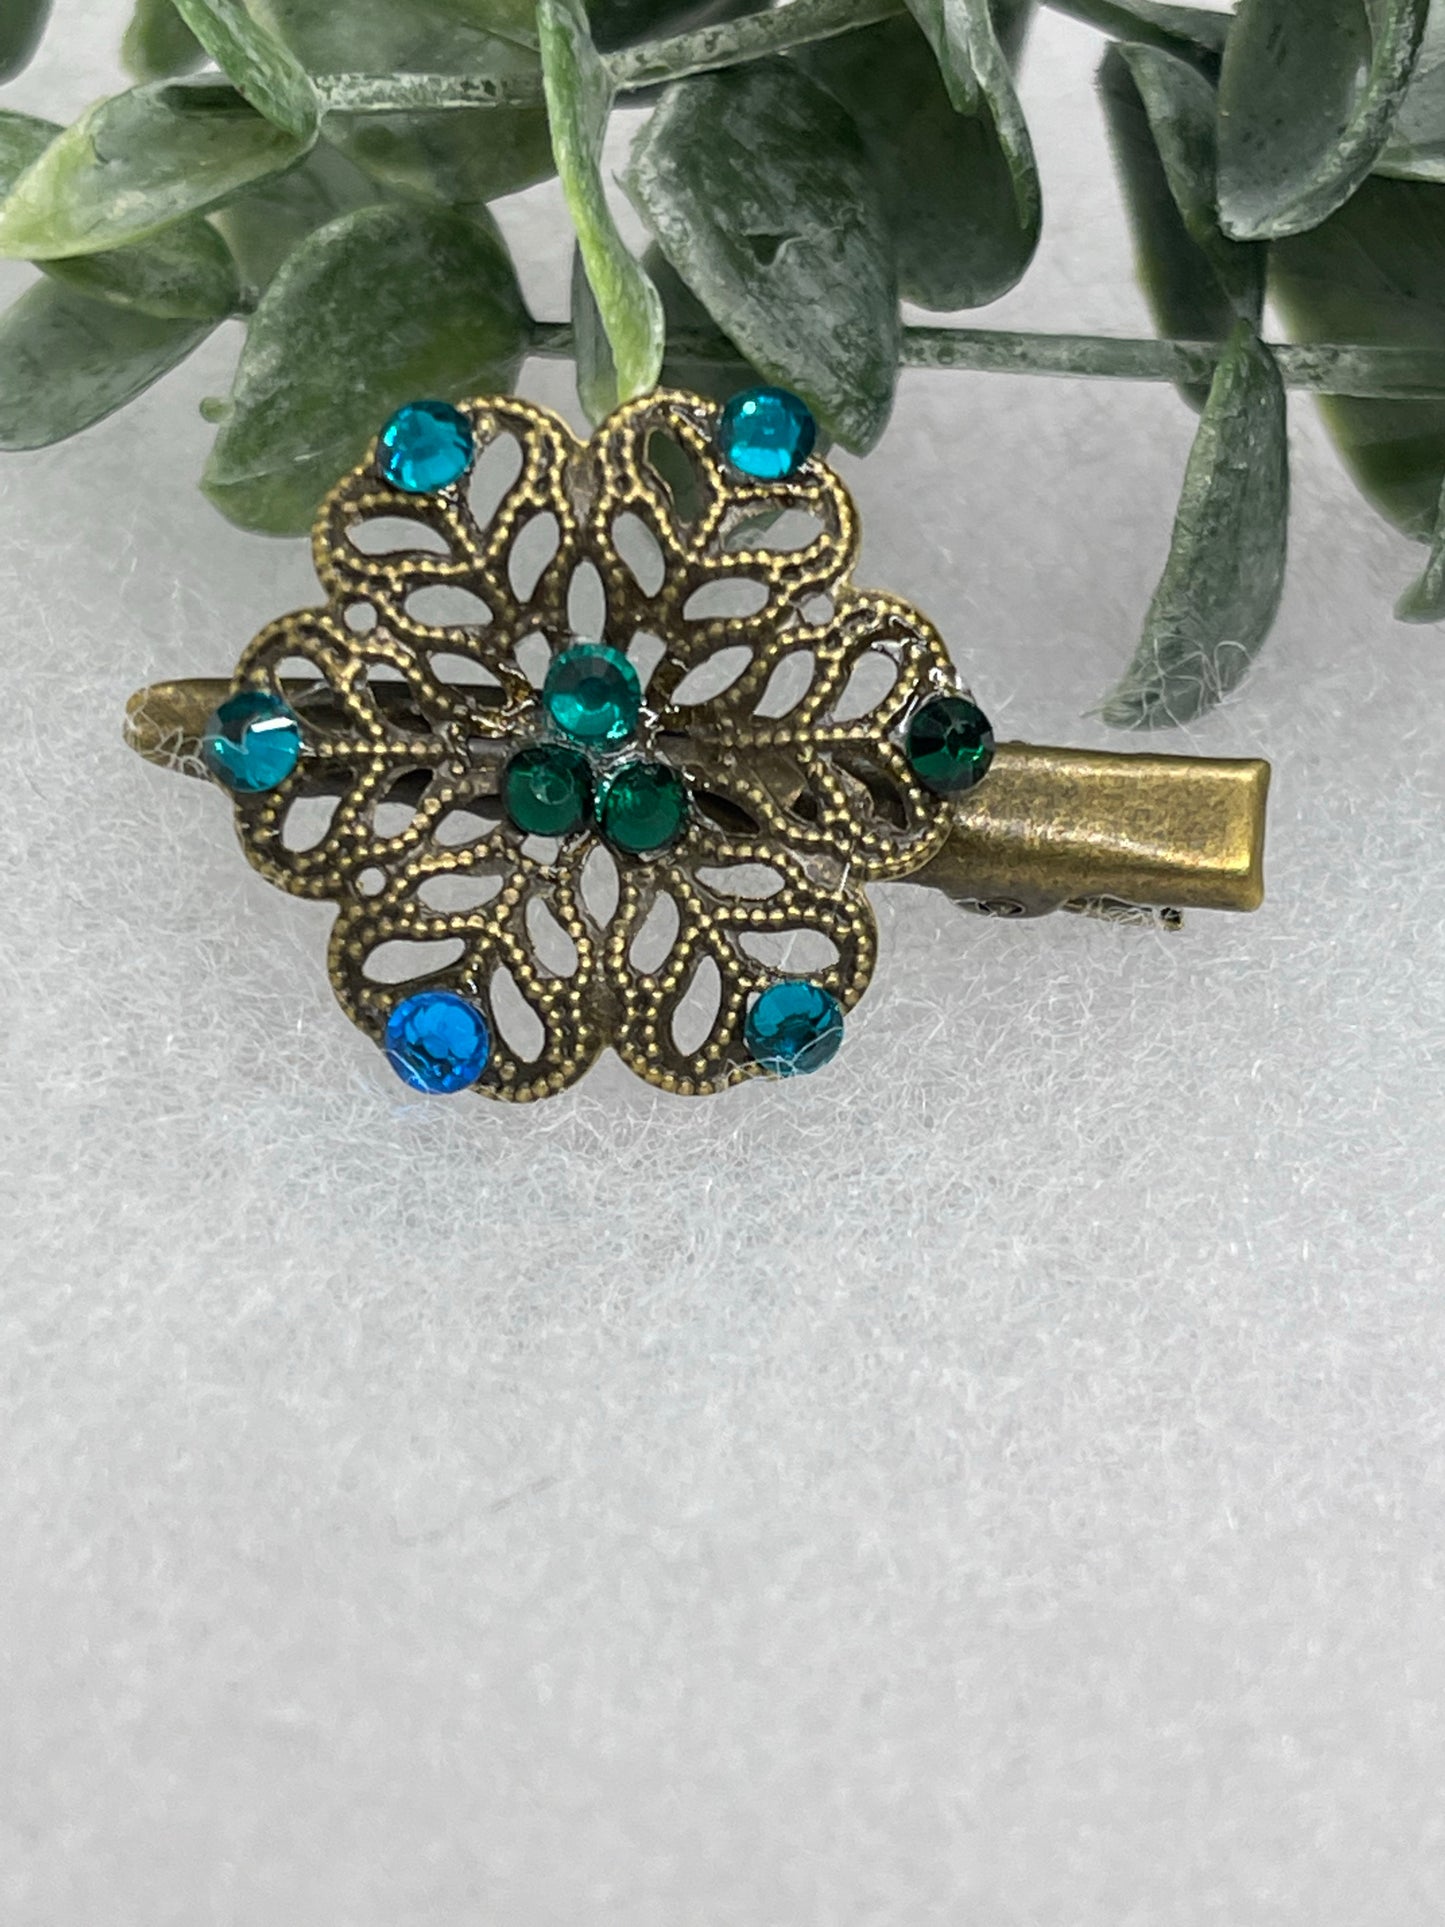 Teal blue green Crystal vintage antique style flower hair alligator clip approximately 2.0” long Handmade hair accessory bridal wedding Retro